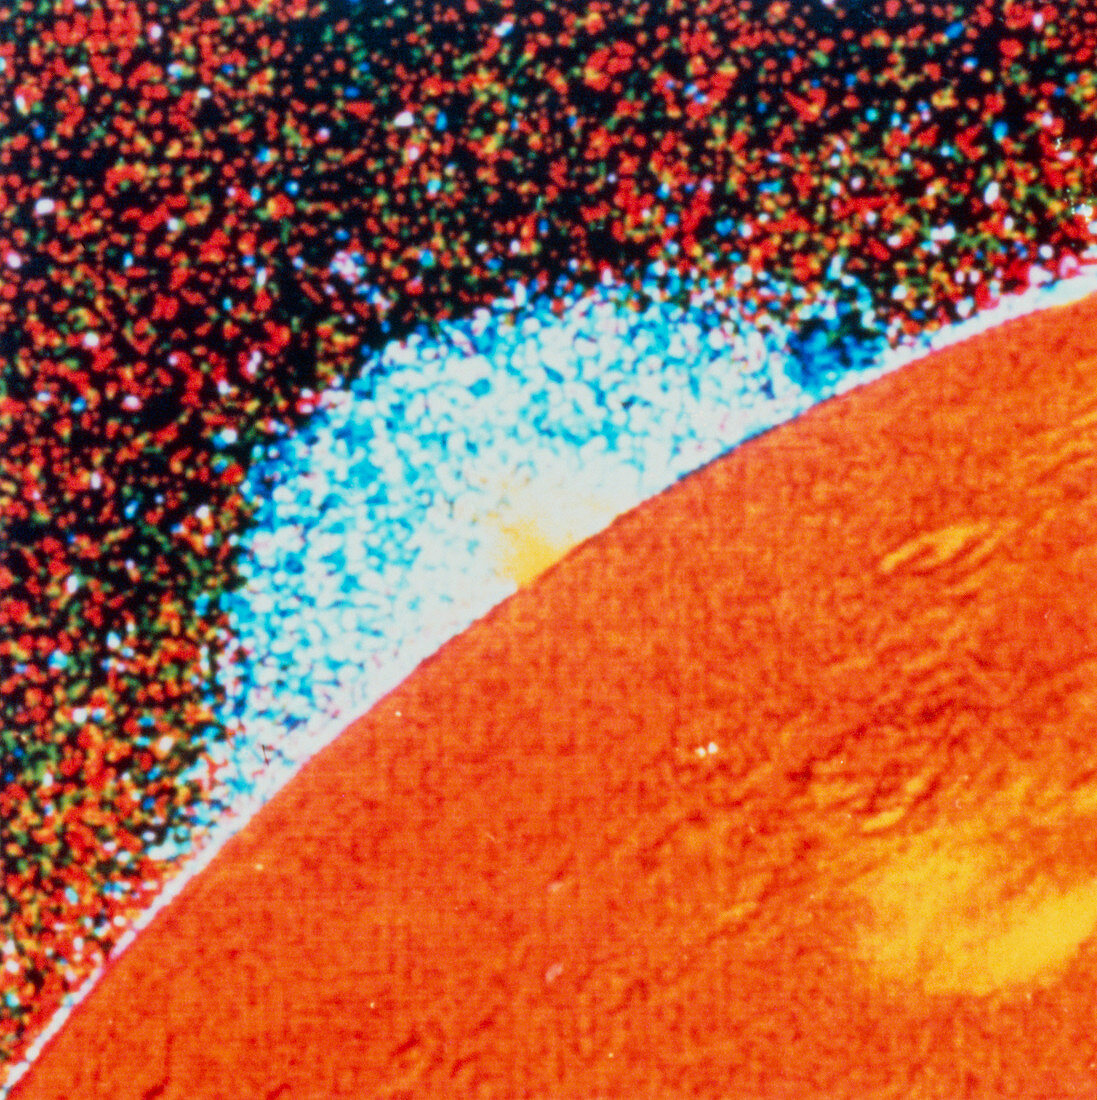 Voyager 1 image of a volcanic plume on Io